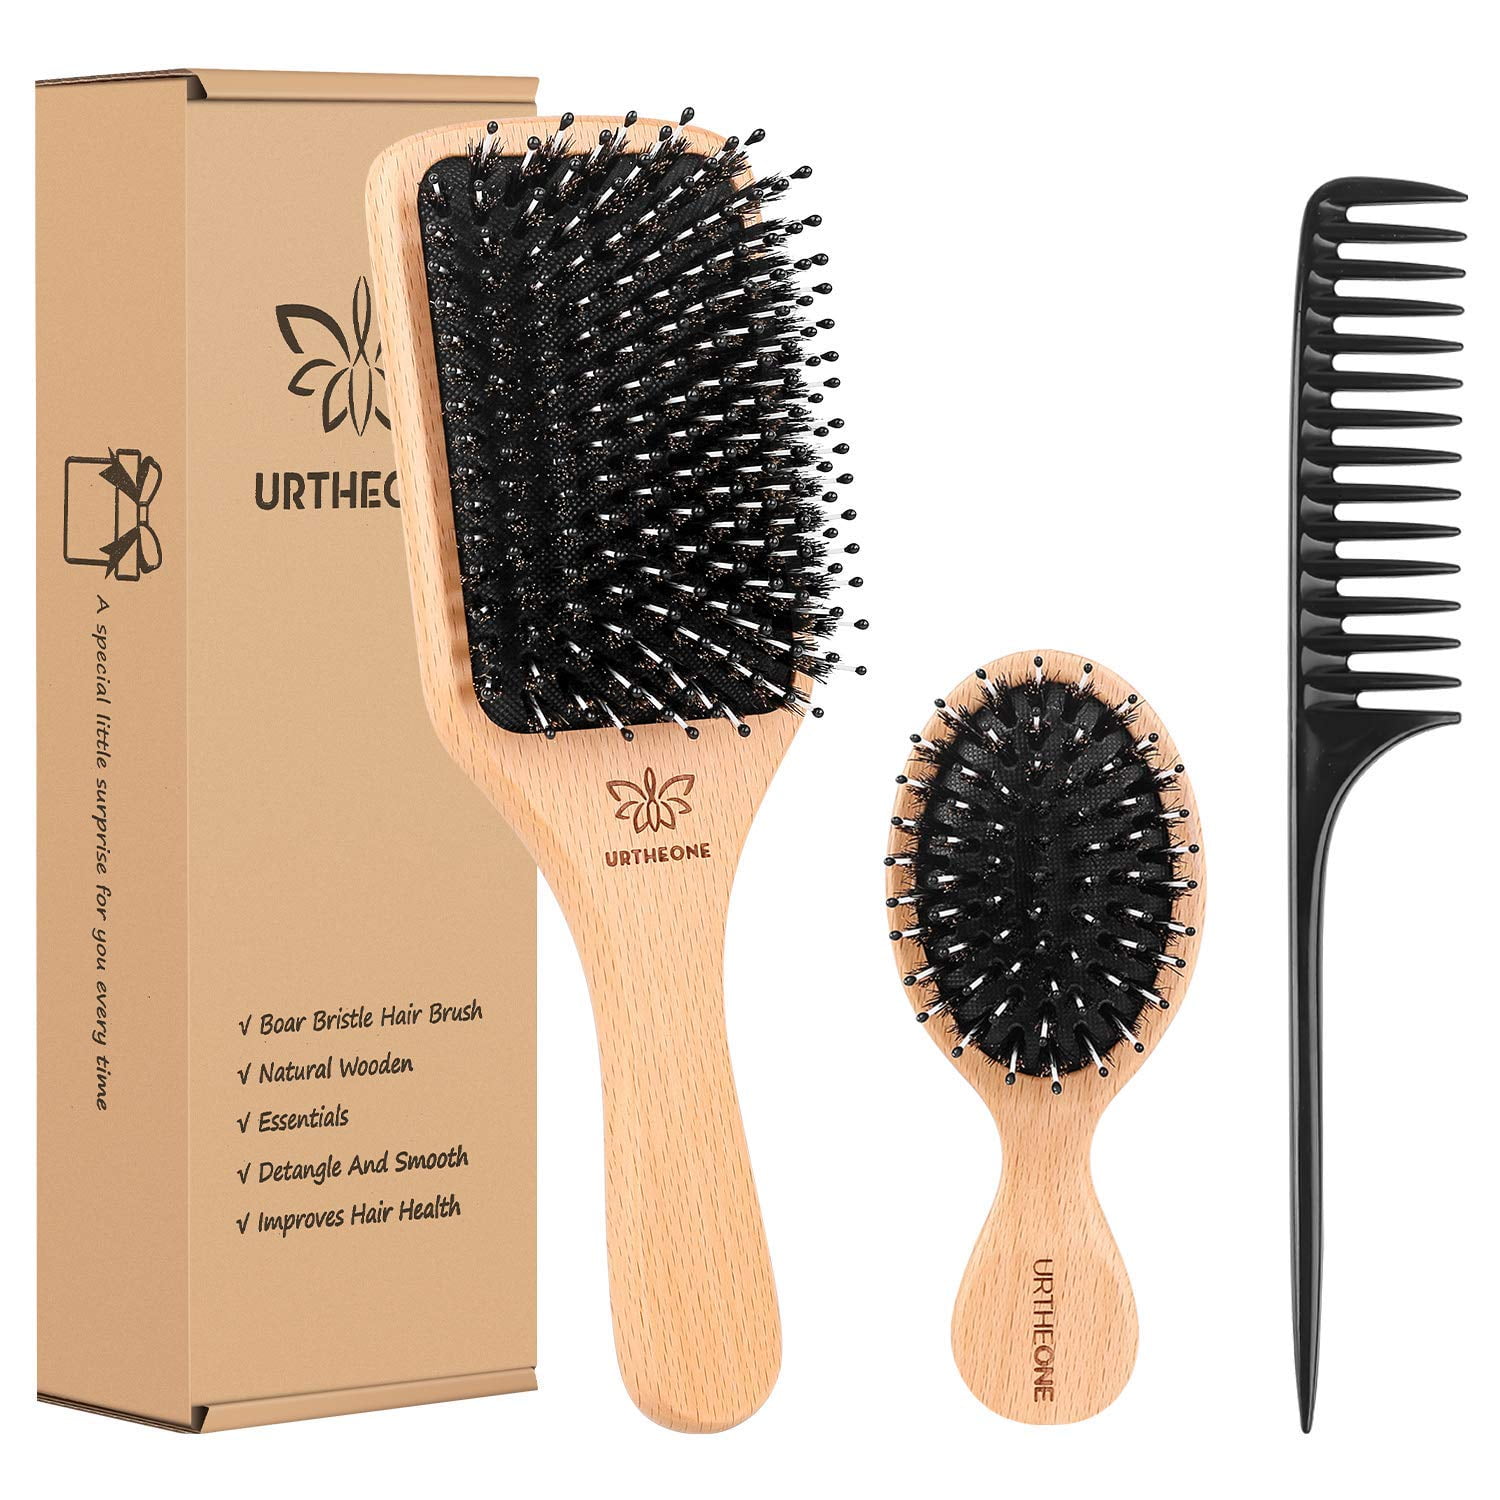 12 Hair Brushes For 6 Hair Types: Which Hair Brush Is Best For Your Hair  And Haircare?